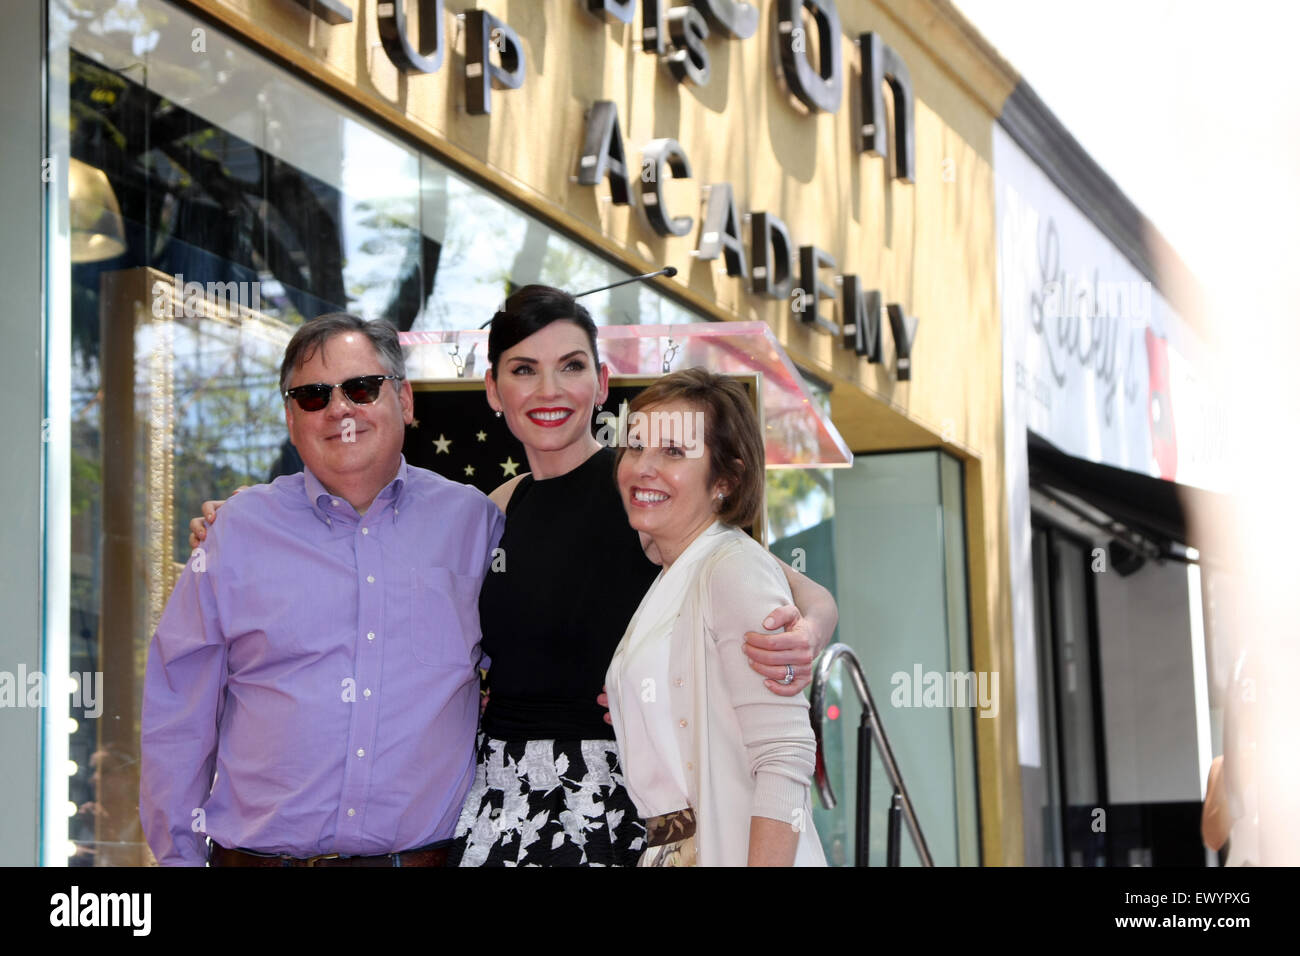 Julianna Margulies honored with a star on the Hollywood Walk of Fame  Featuring: Robert King, Julianna Margulies, Michelle King Where: Los Angeles, California, United States When: 01 May 2015 C Stock Photo